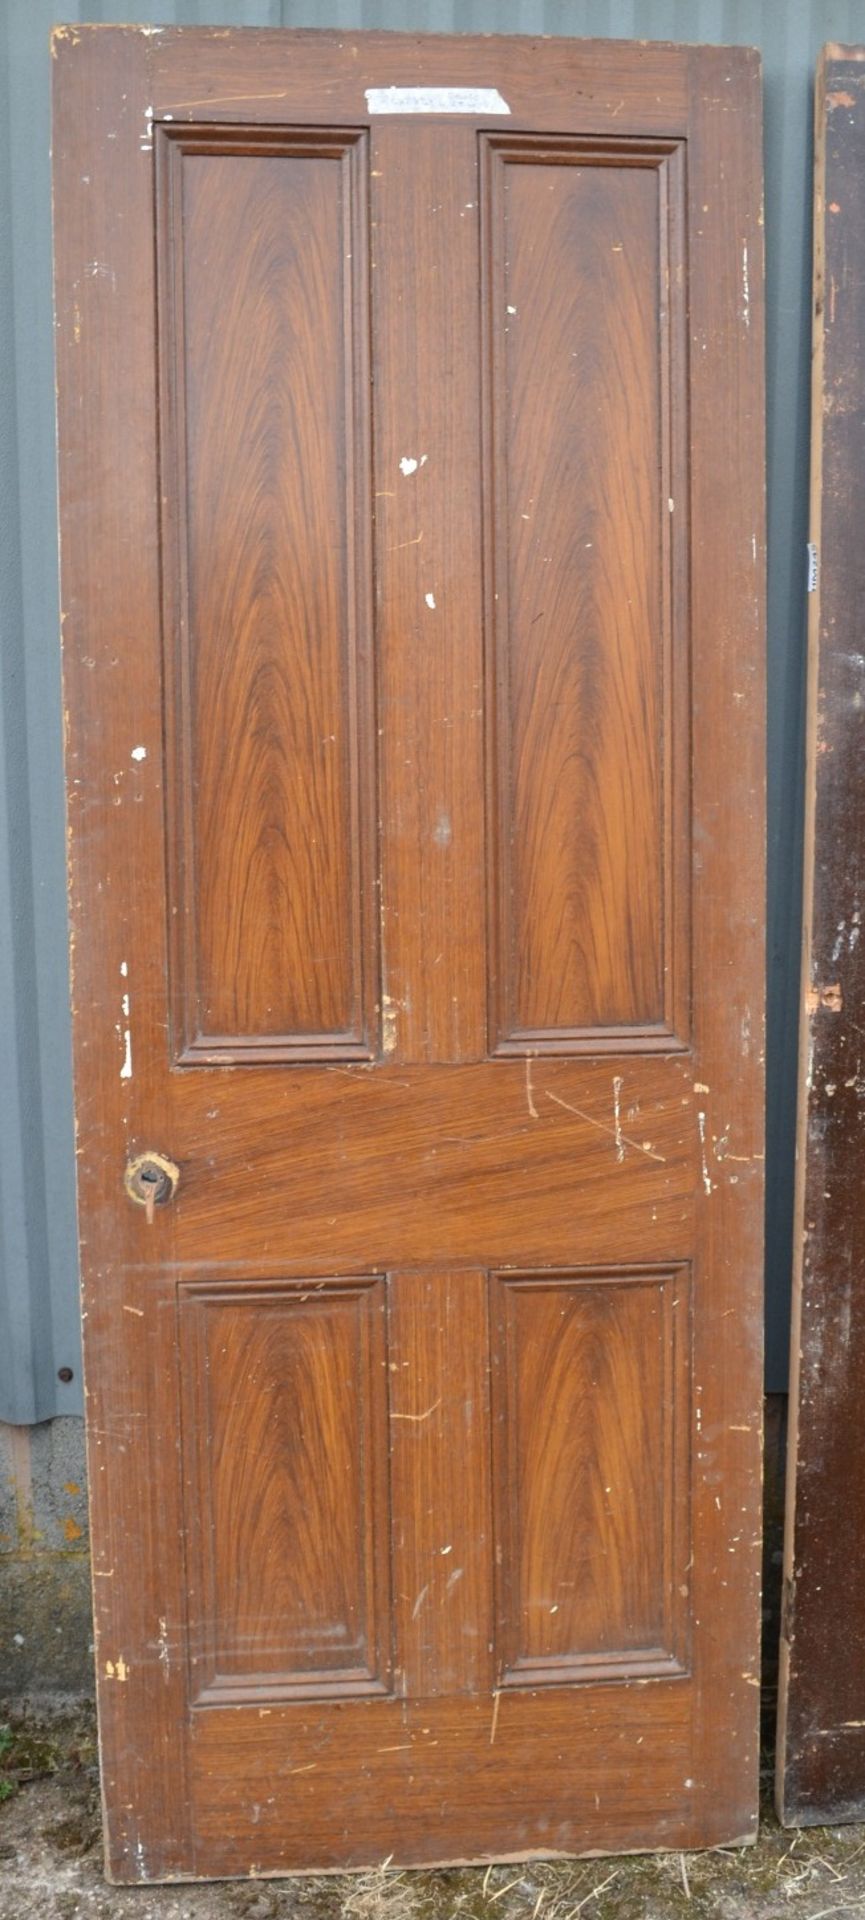 Set Of 4 x Reclaimed 4-Panel Wooden Doors - Taken From A Grade II Listed Property - Image 8 of 9